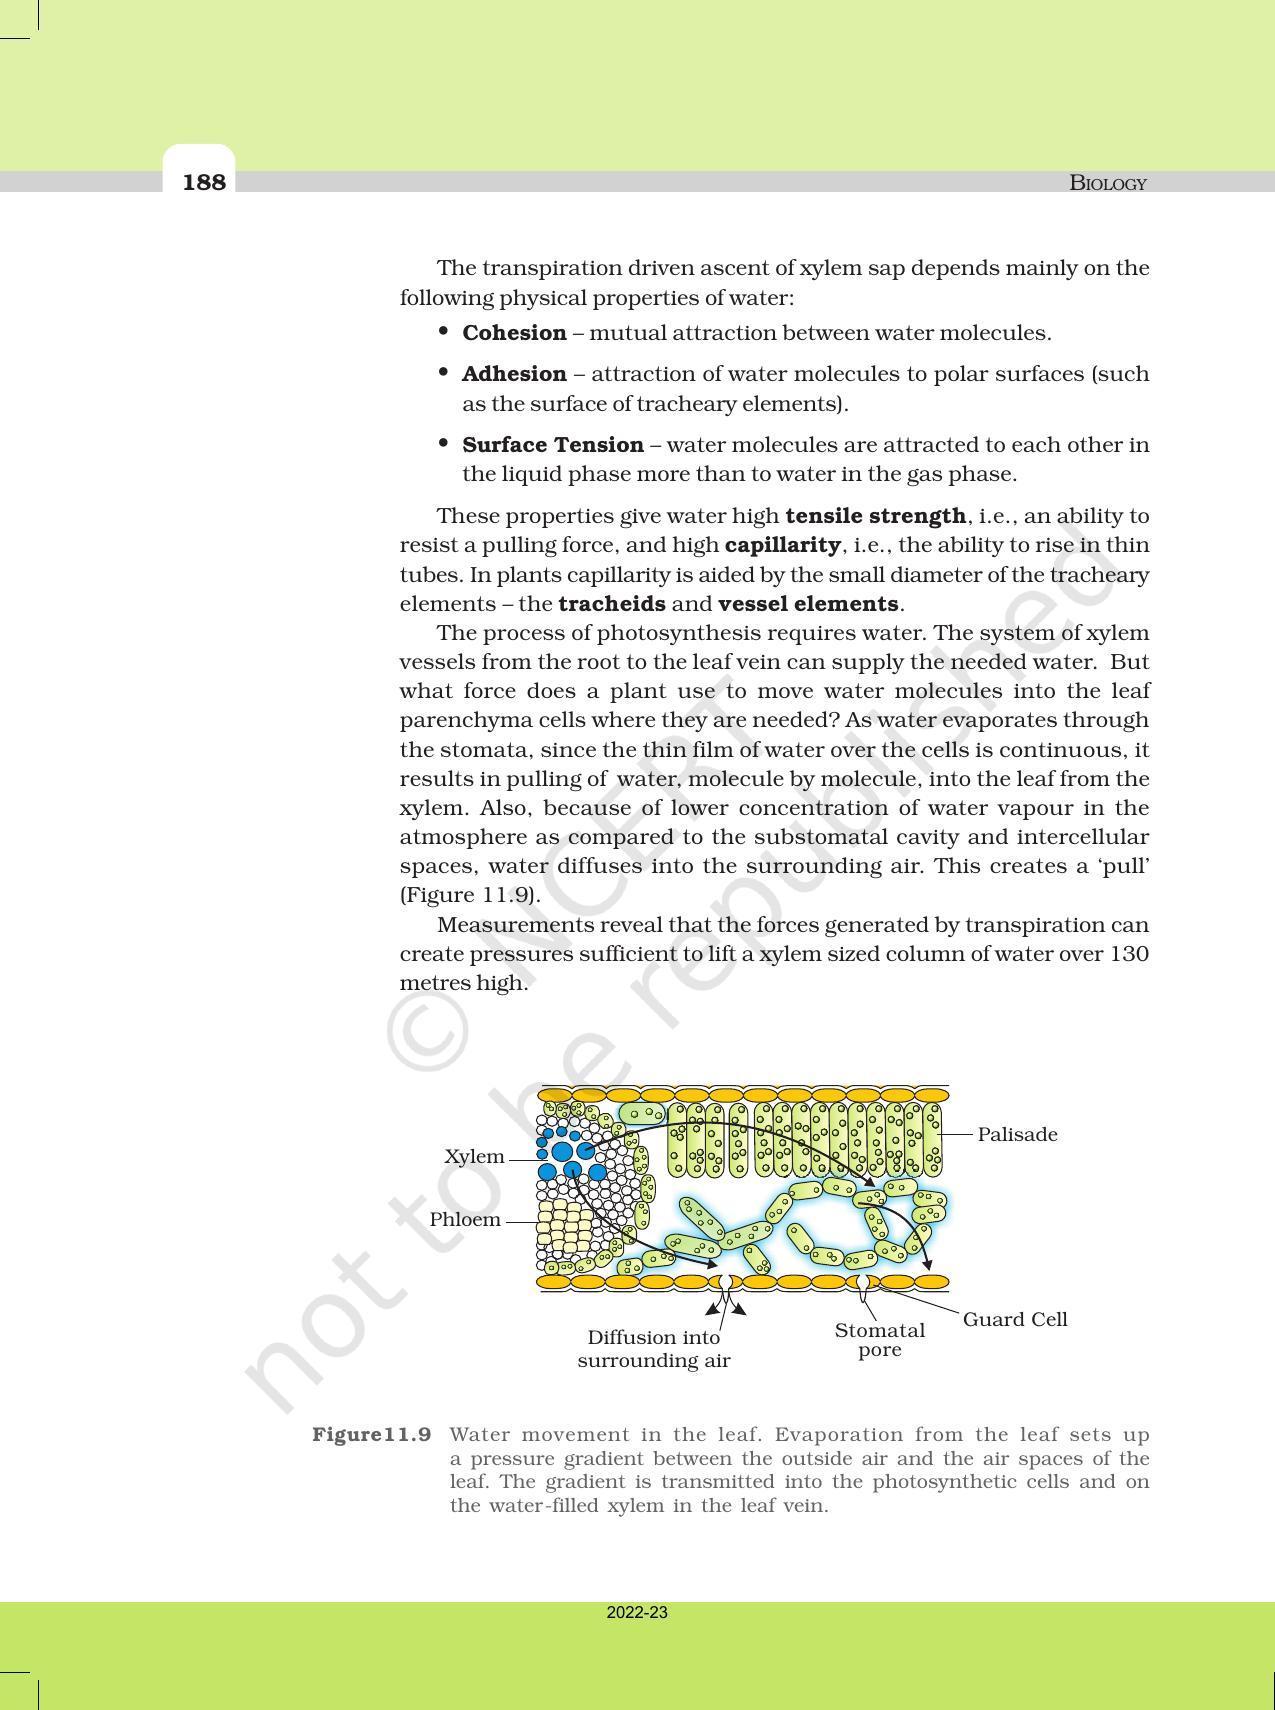 NCERT Book for Class 11 Biology Chapter 11 Transport in Plants - Page 16